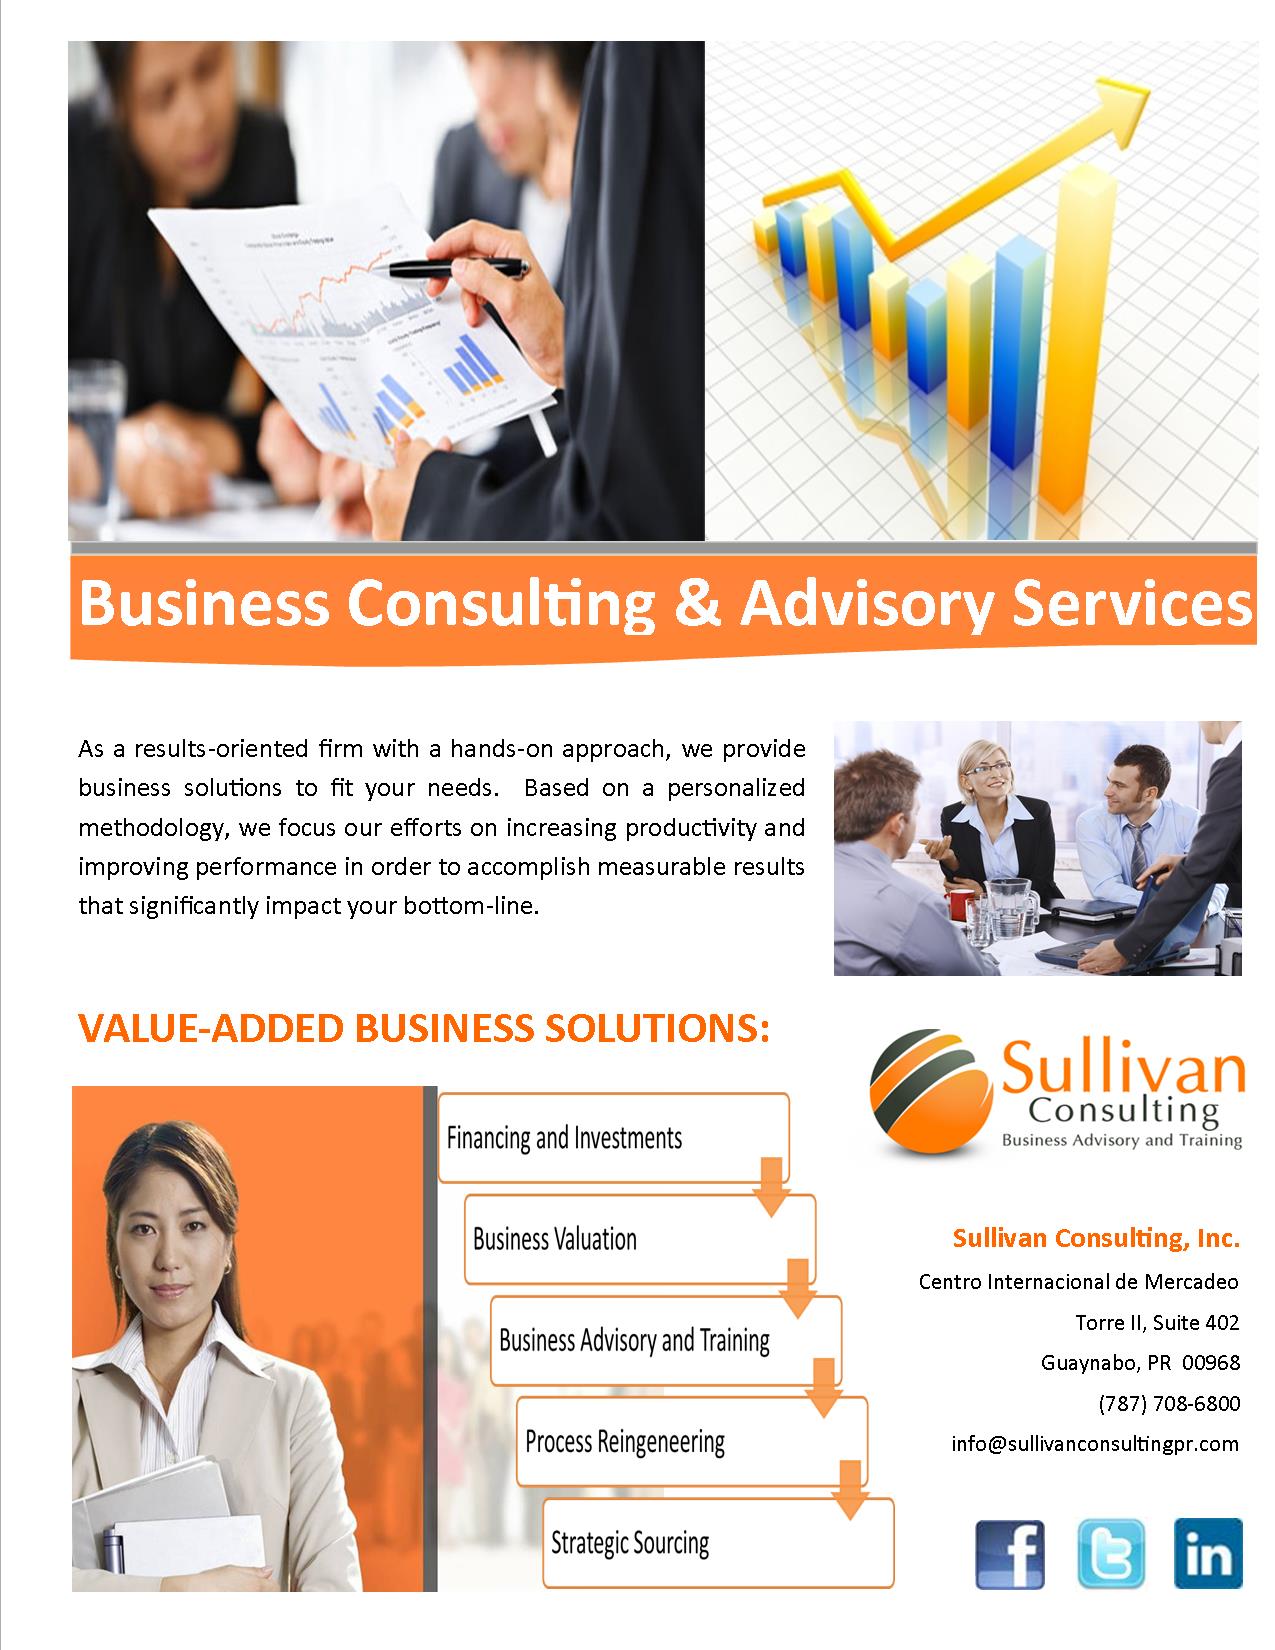 Business consulting & advisory services